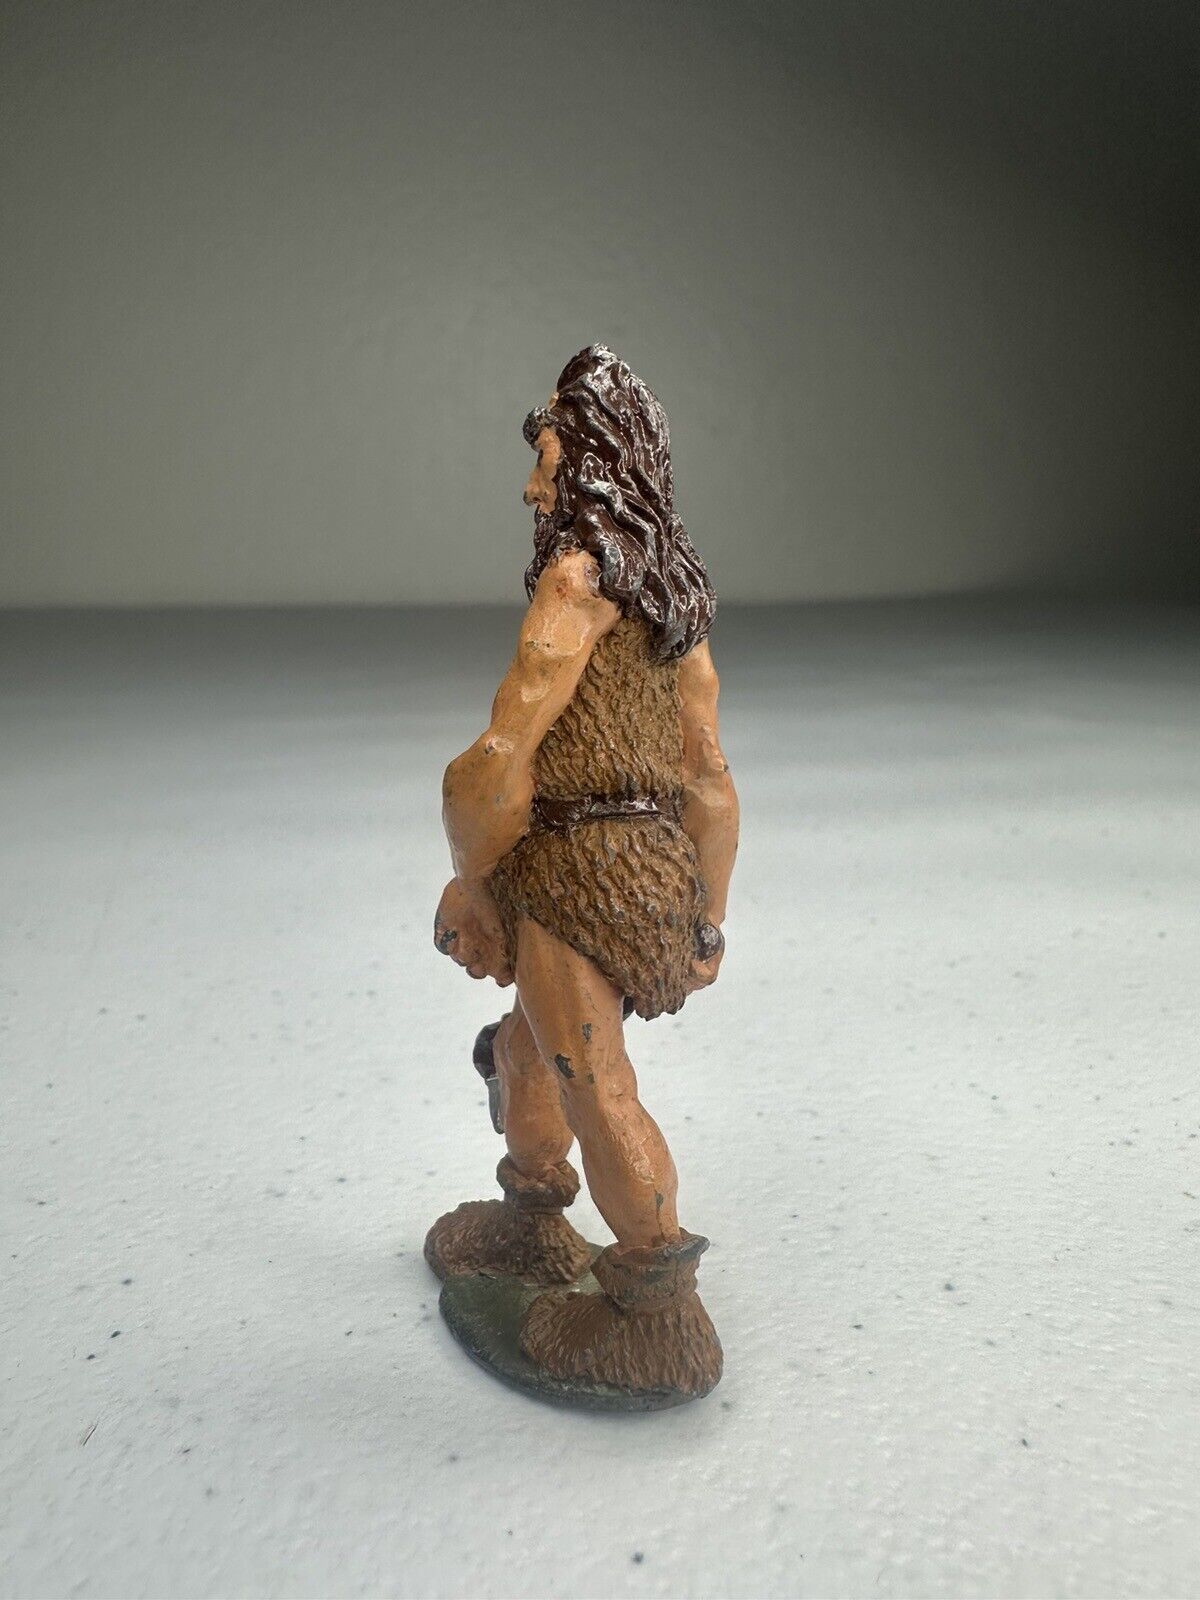 Vintage 1977 Ral Partha Dungeons & Dragons Miniature - Frost Giant with Club - Rare Collectors Item - TreasuTiques